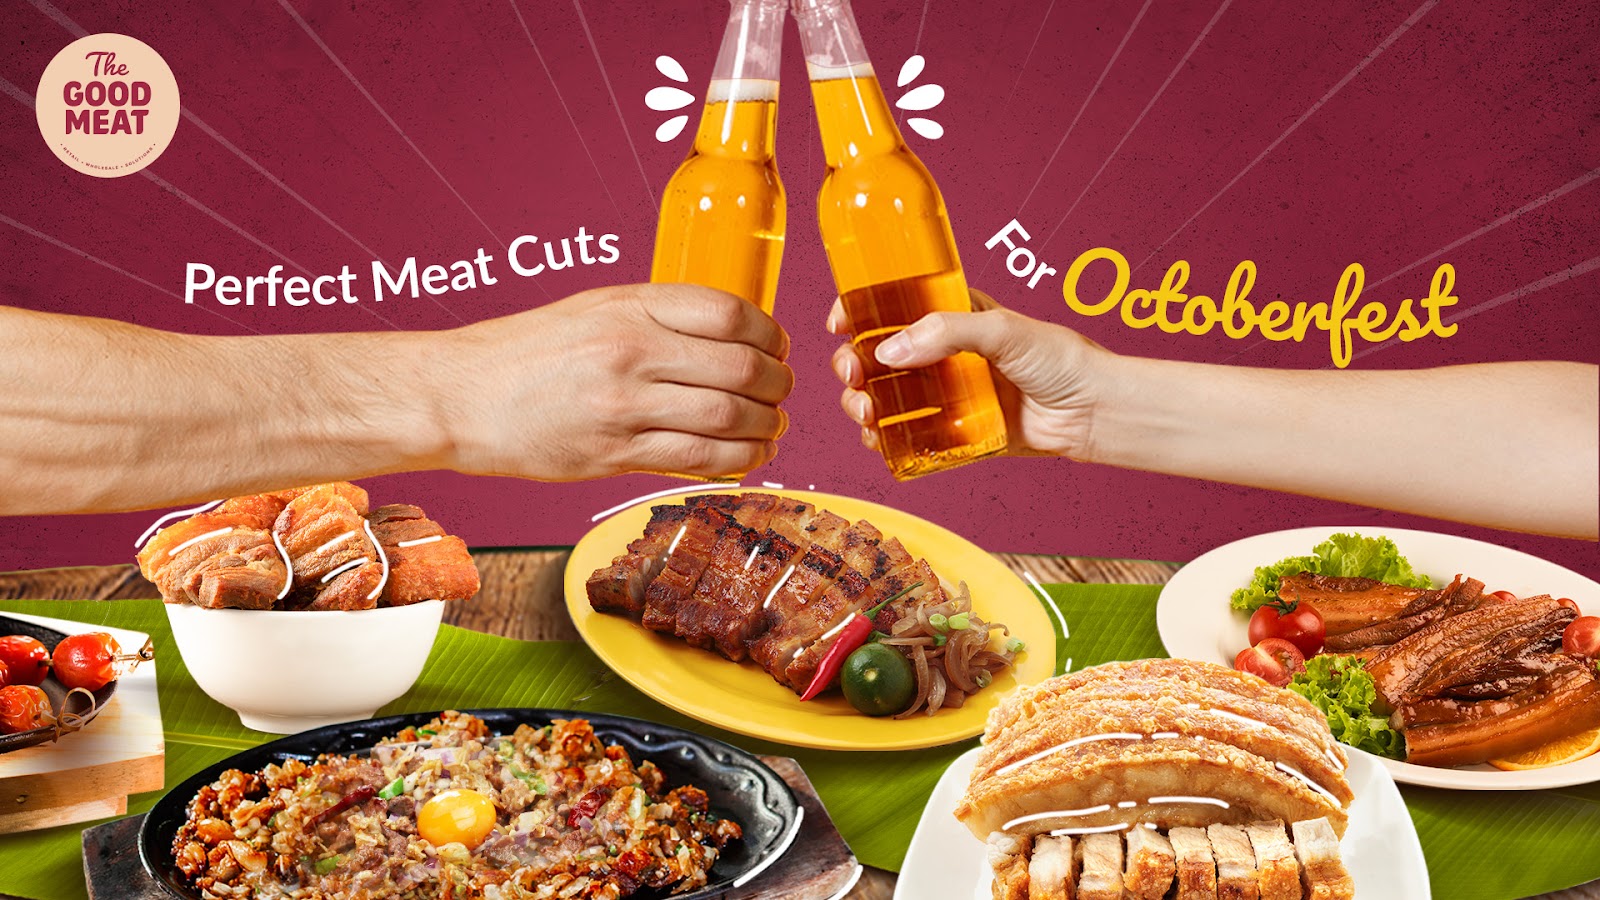 Perfect Meat Cuts for Octoberfest